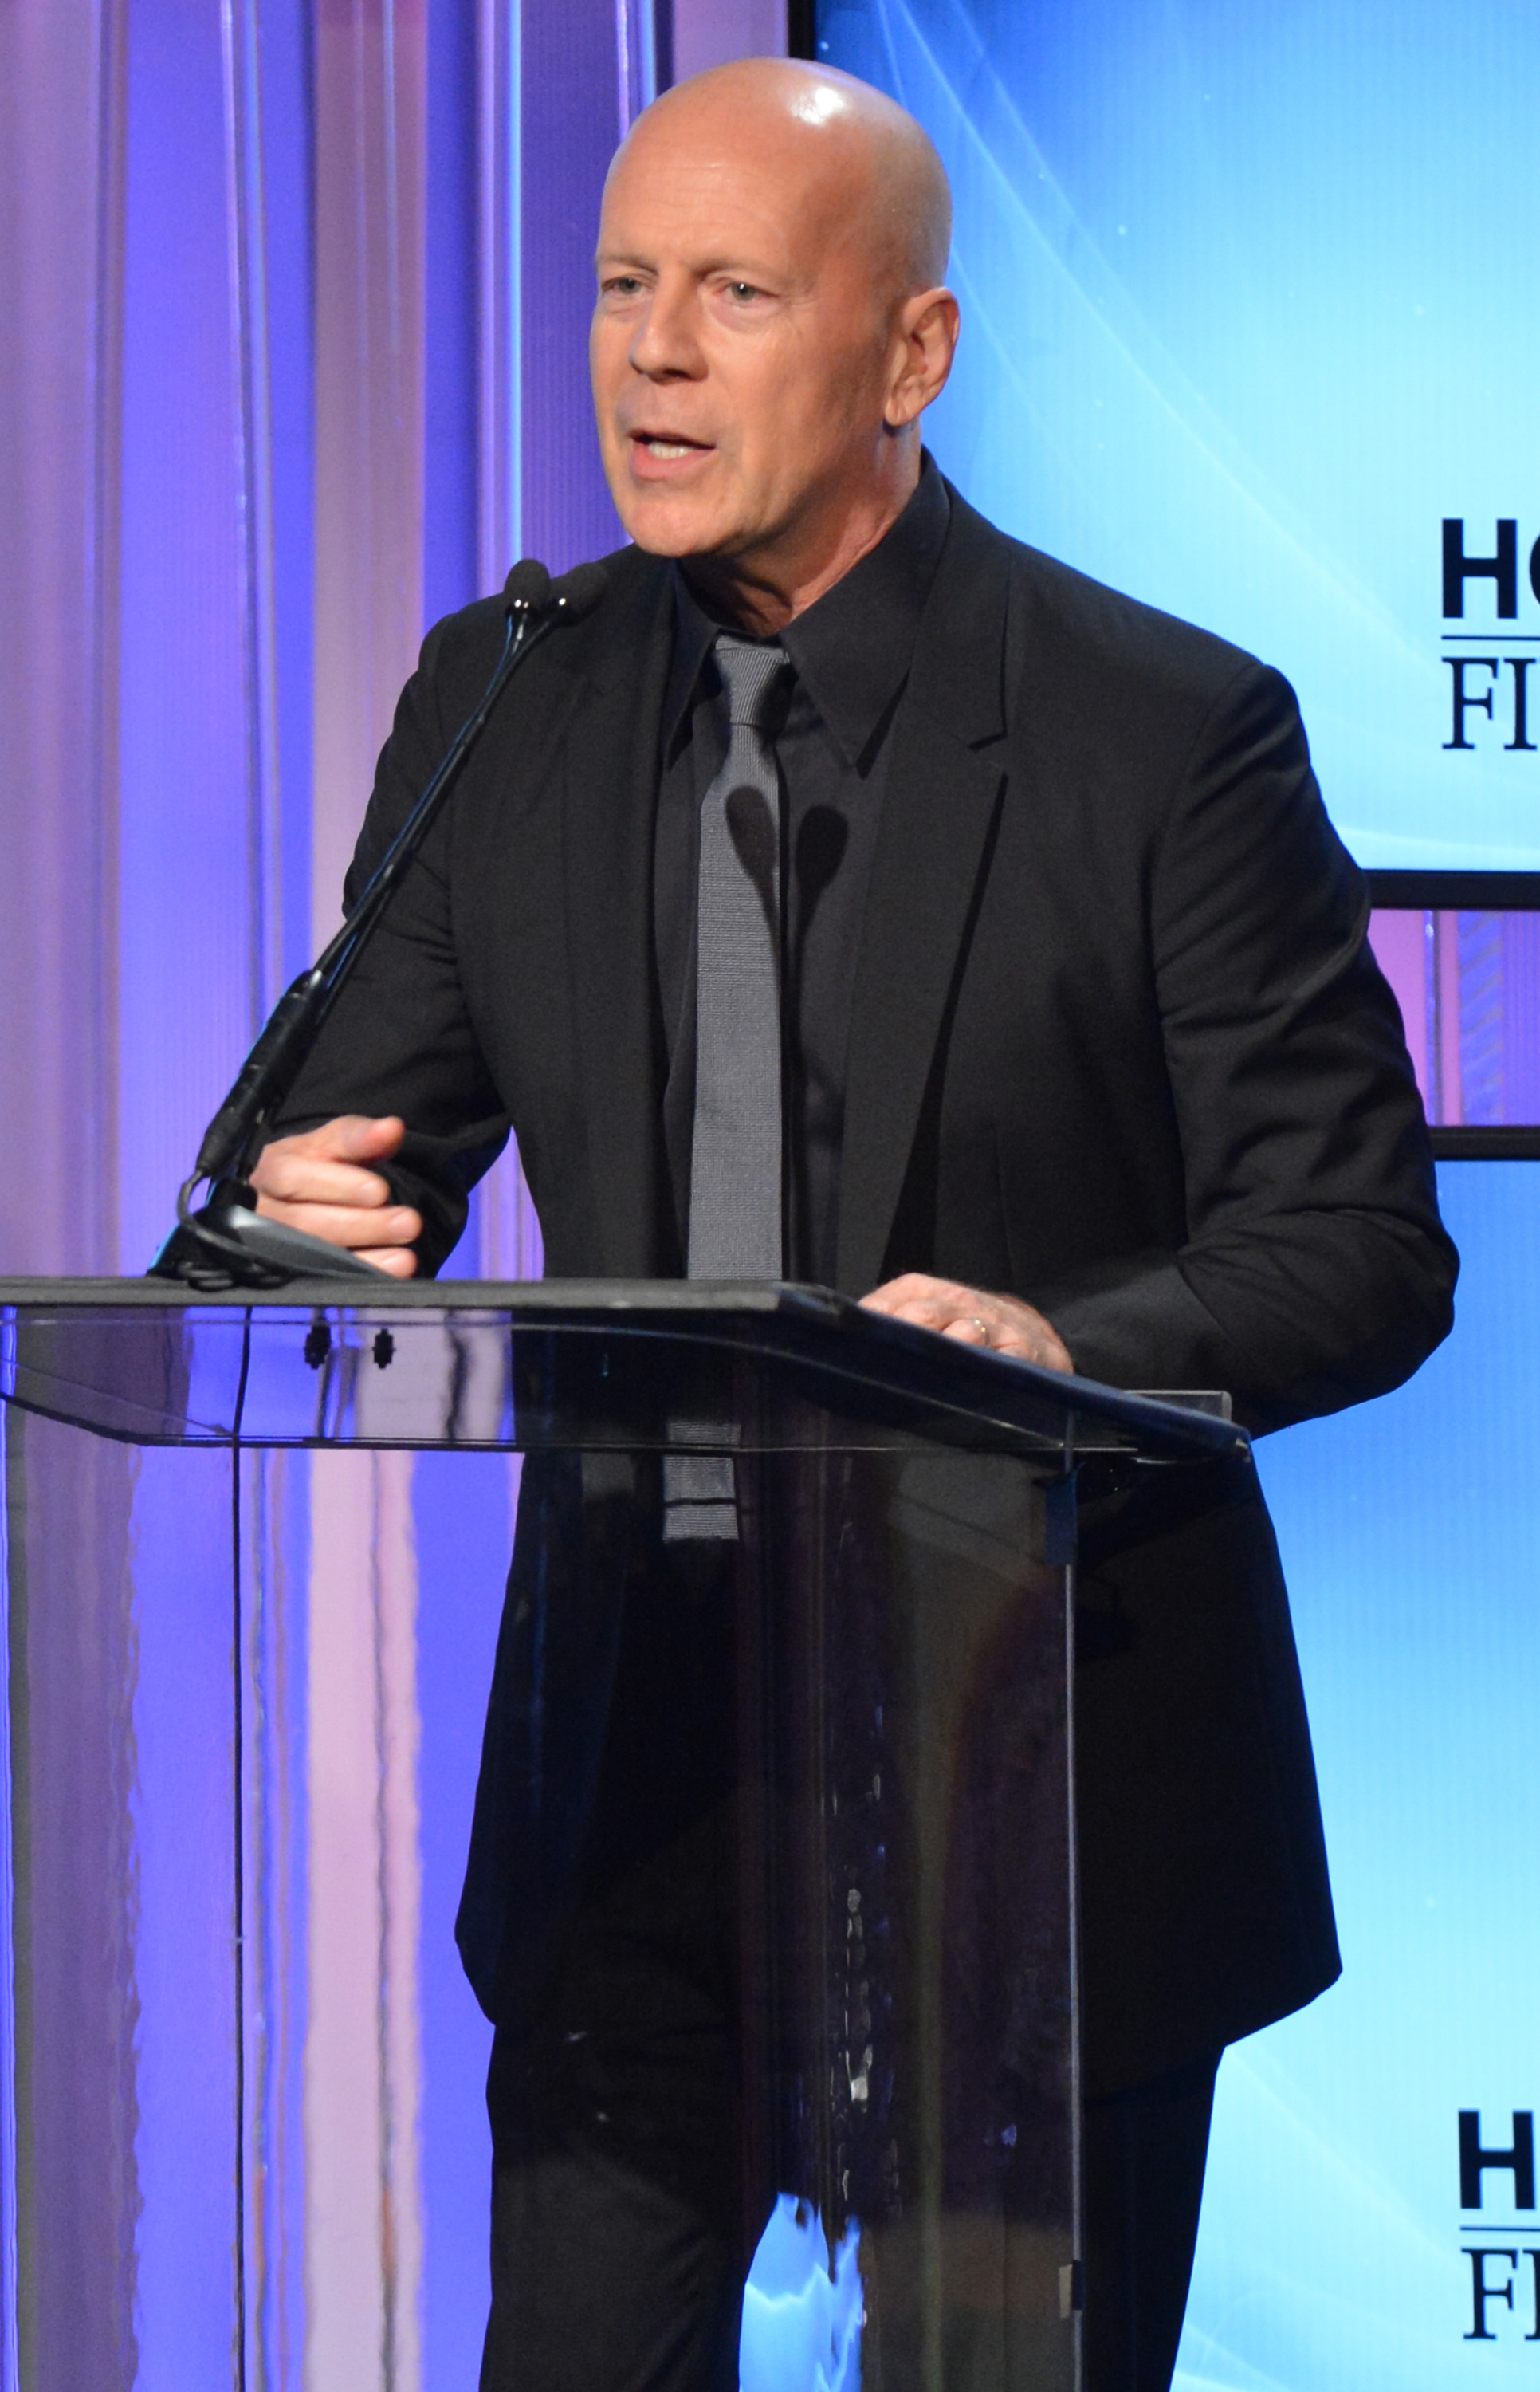 Bruce Willis speaking during the 17th Annual Hollywood Film Awards in Beverly Hills, California on October 21, 2013  Source: Getty Images